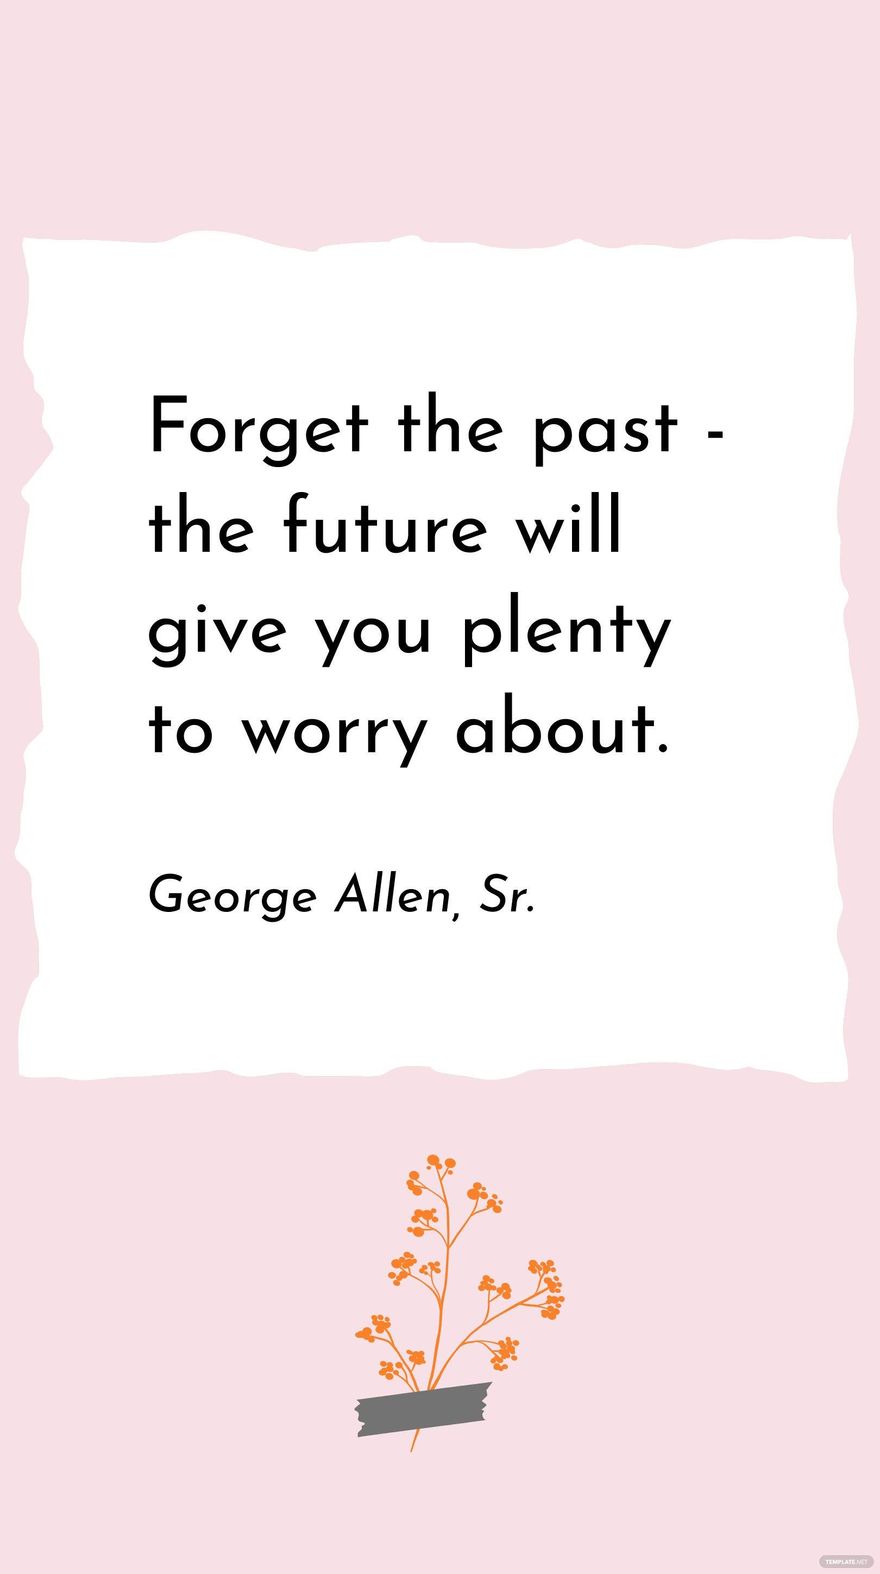 George Allen, Sr. - Forget the past - the future will give you plenty to worry about.